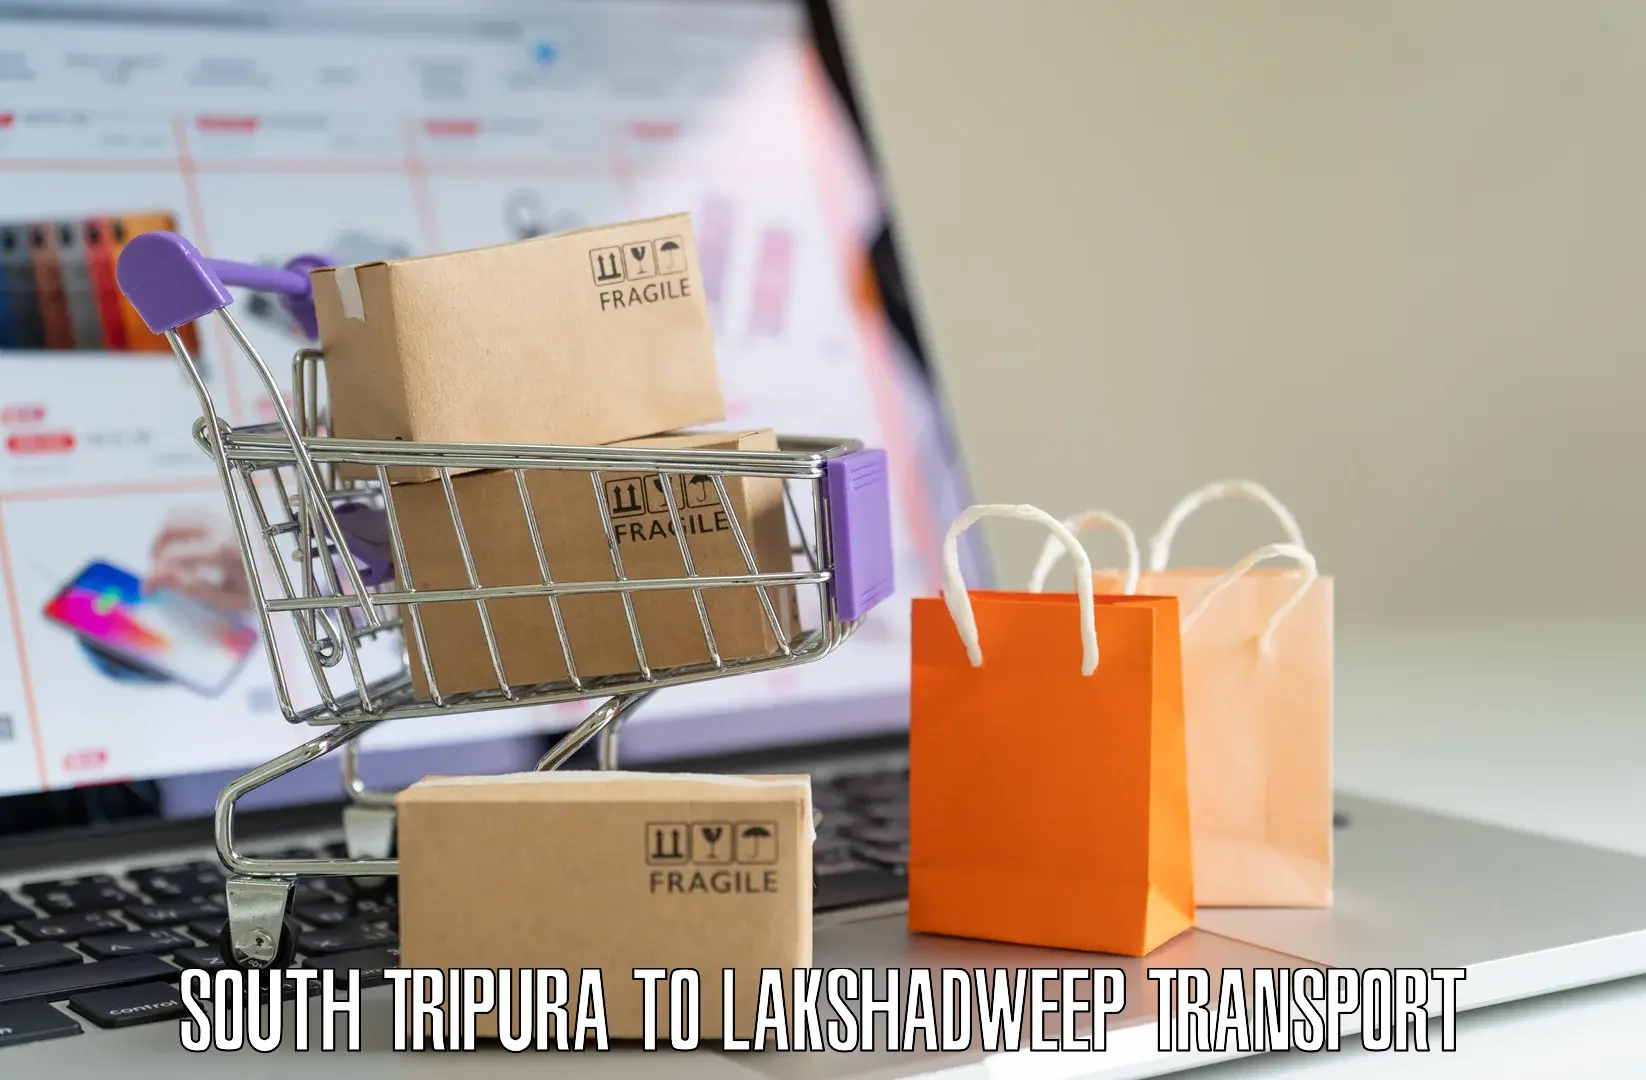 Road transport services South Tripura to Lakshadweep